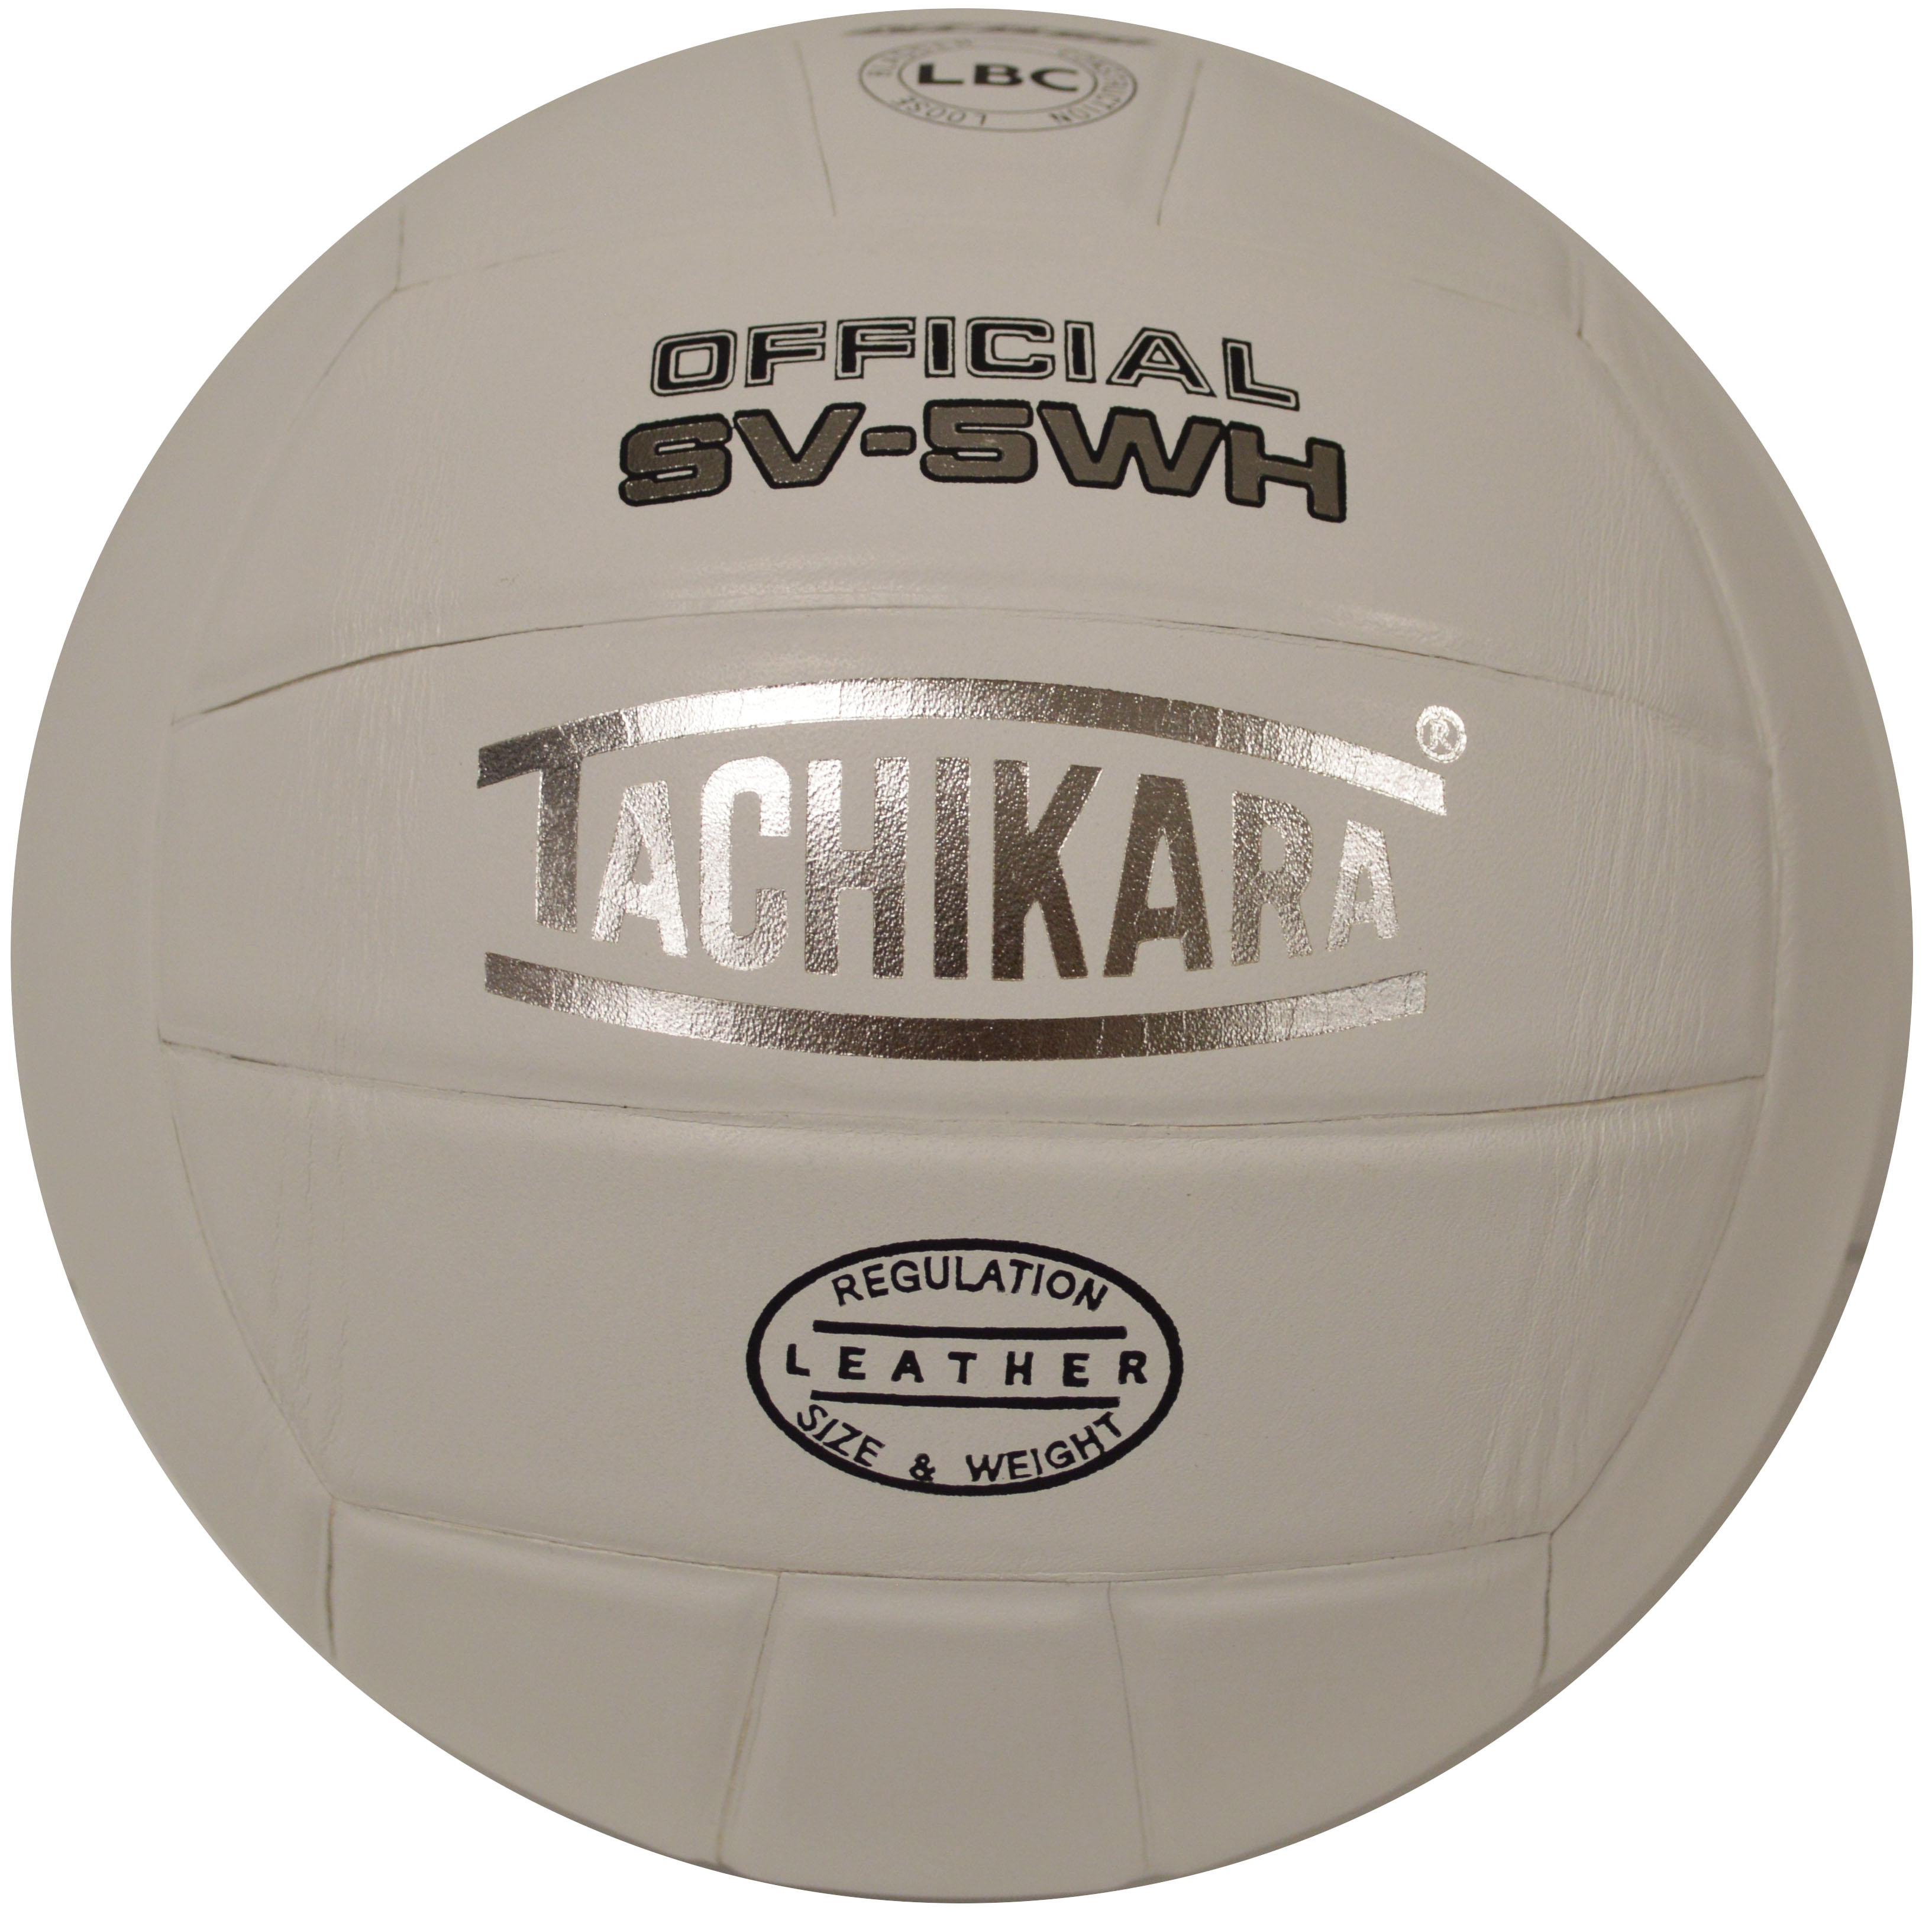 Tachikara SV18S Volleyball, 25-3/5 to 26-2/5 in Dia, Composite Leather - 1